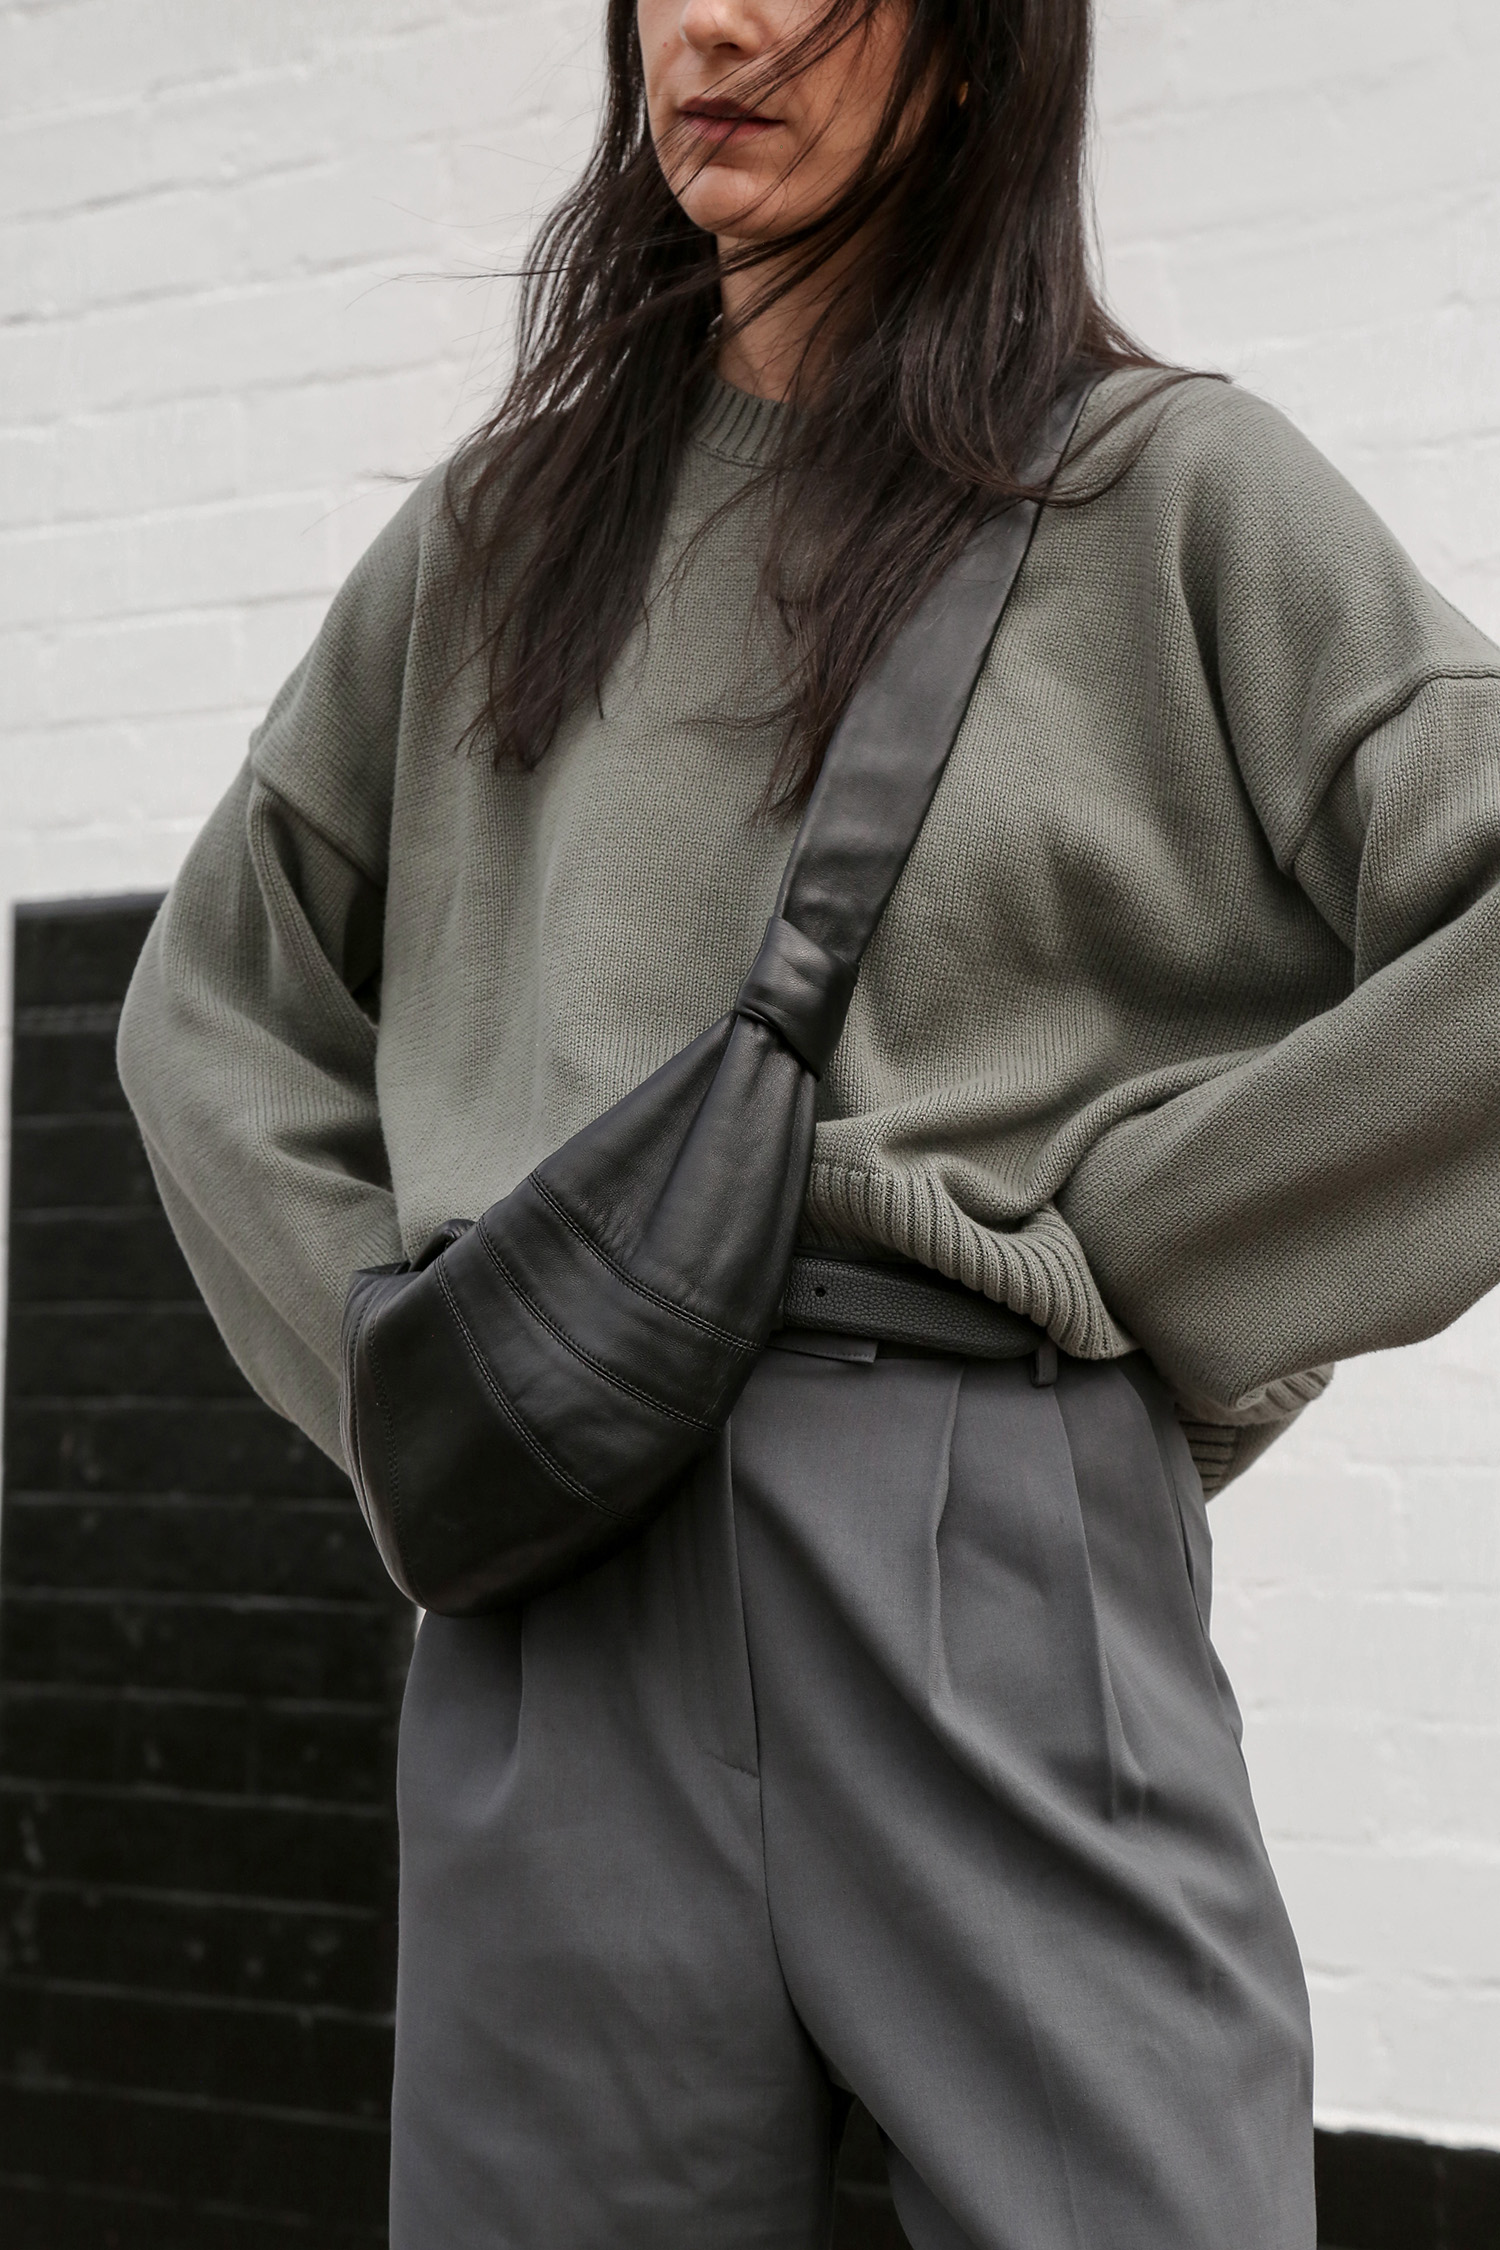 Quince oversized cotton sweater in agave with Lemaire Croissant Bag